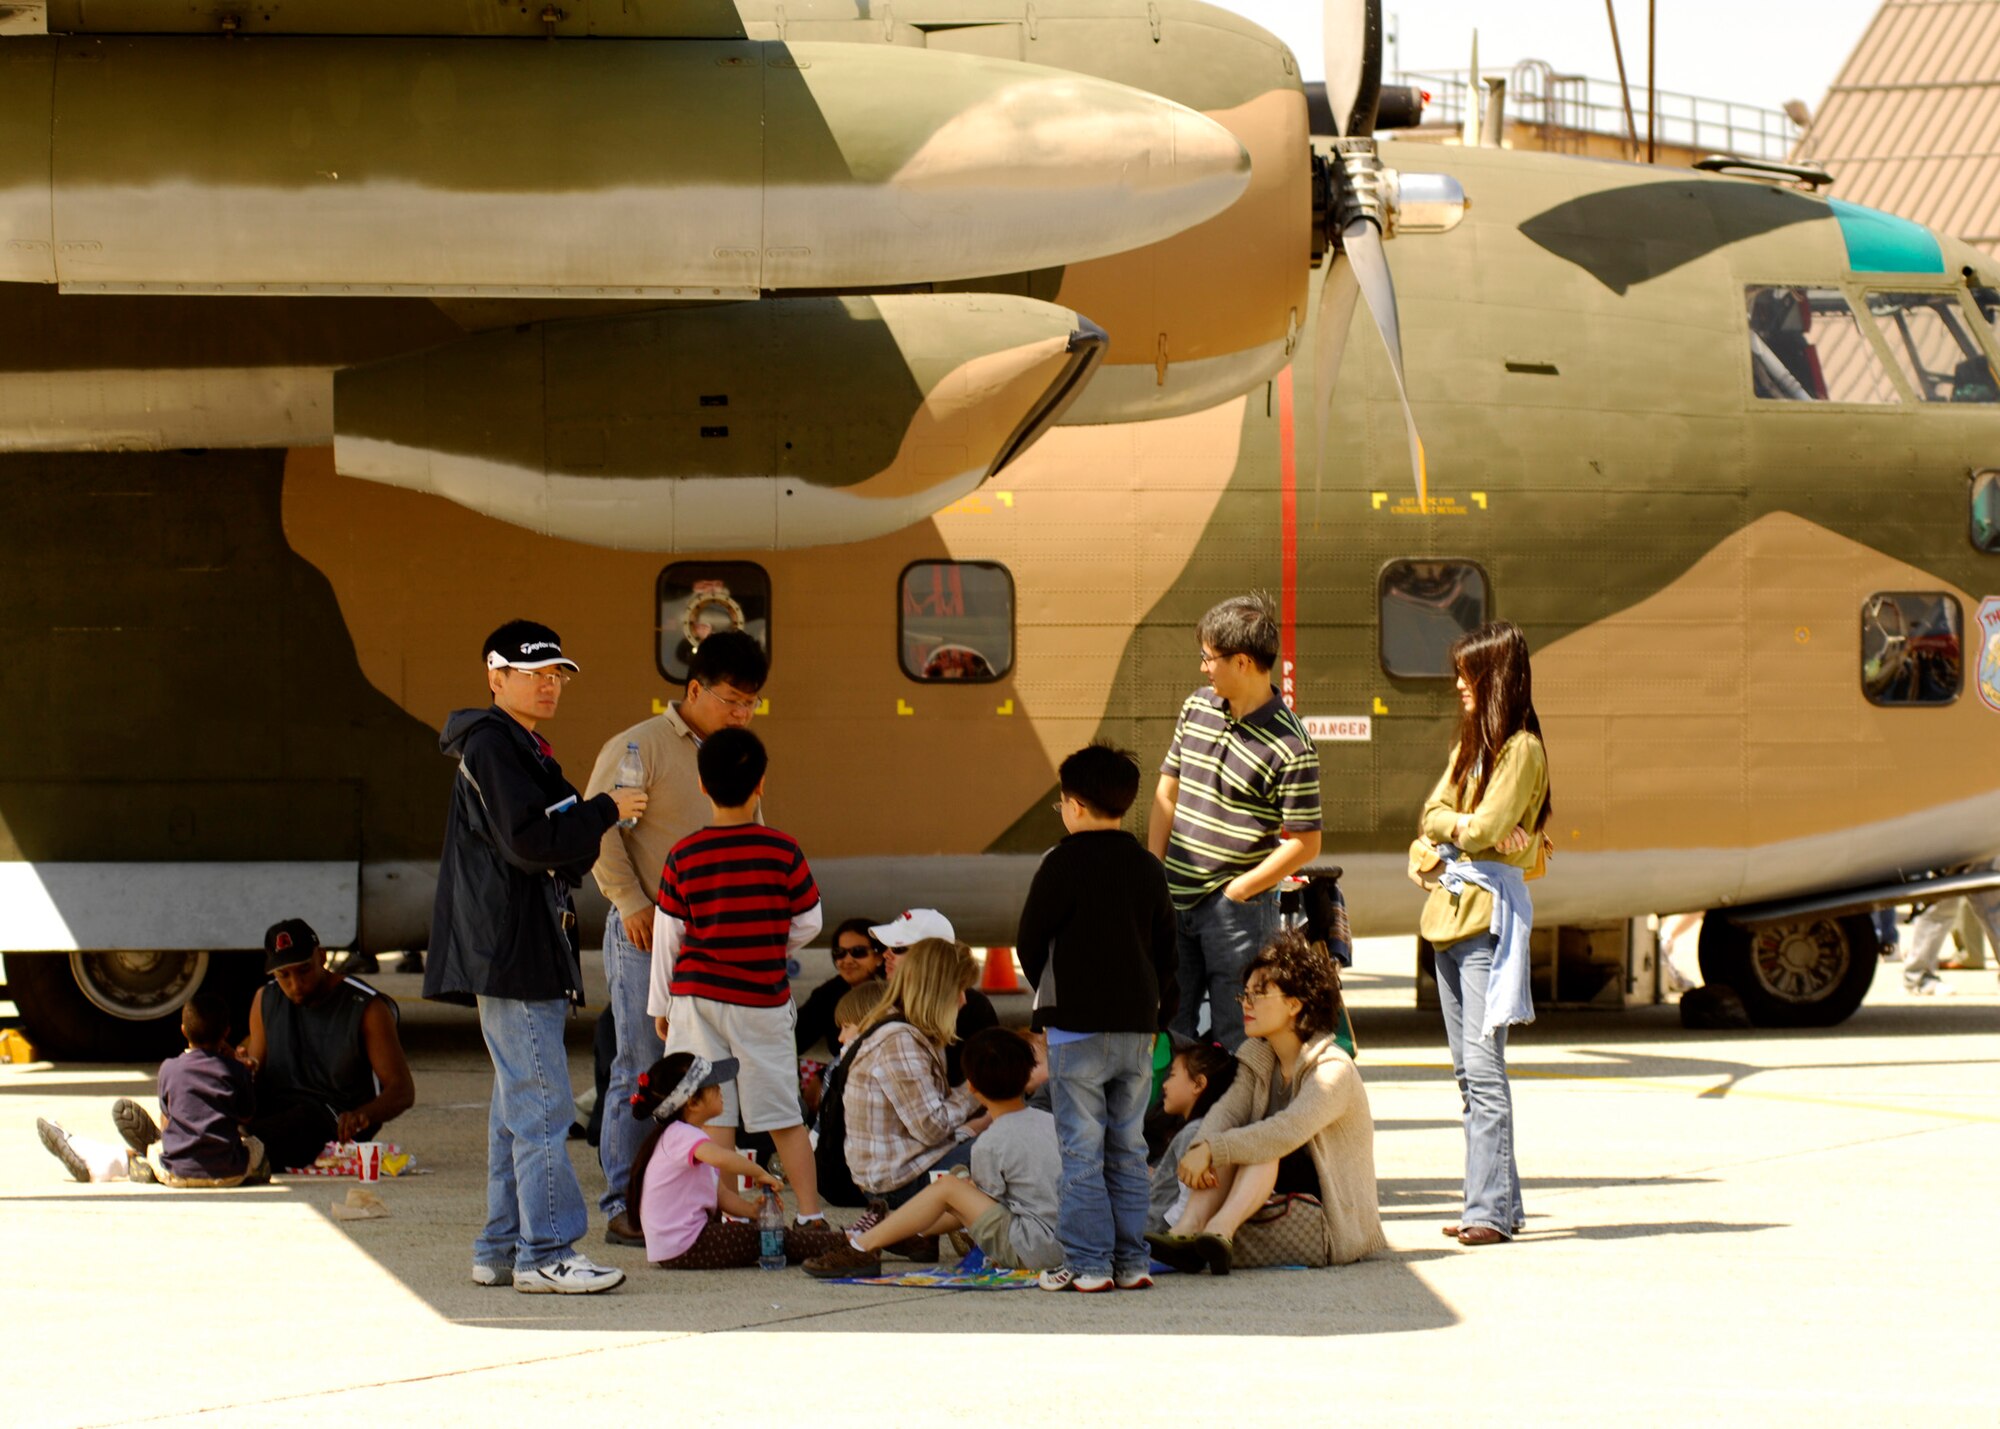 Spectators use the shade from a C-130 aircraft's wing at the 2008 Joint Service Open House hosted by Andrews Air Force Base, Md., May 17th.   This year?s event will have demonstrations by the Navy Blue Angels and the Army's Golden Knights.  Once again the JSOH will host a wide variety of both military and civilian air and ground demonstrations. To include the Air Force's newest and the world's most advanced fighter jet, the F-22A Raptor. (U.S. Air Force photo by Tech Sgt. Suzanne M. Day)(Released)
